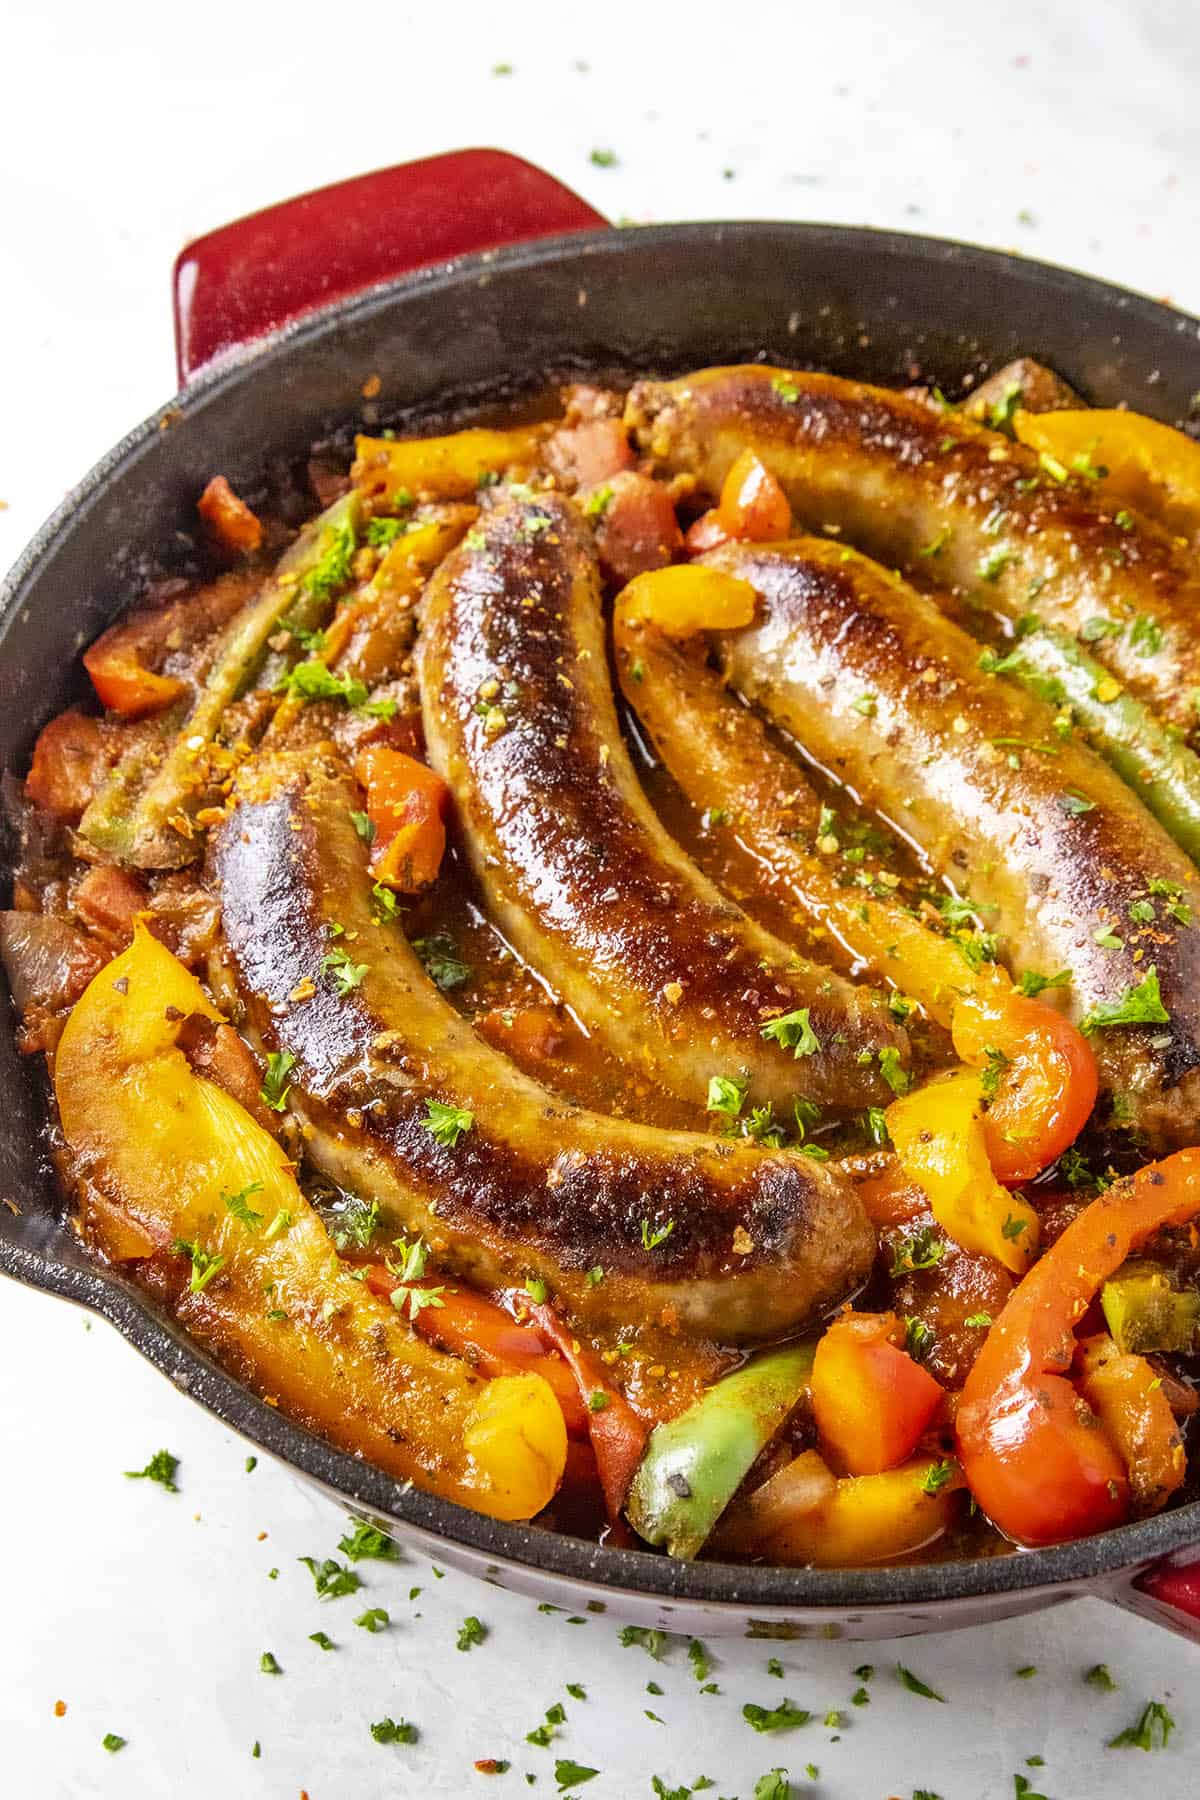 Sausage and Peppers in a hot pan, ready for dinner.